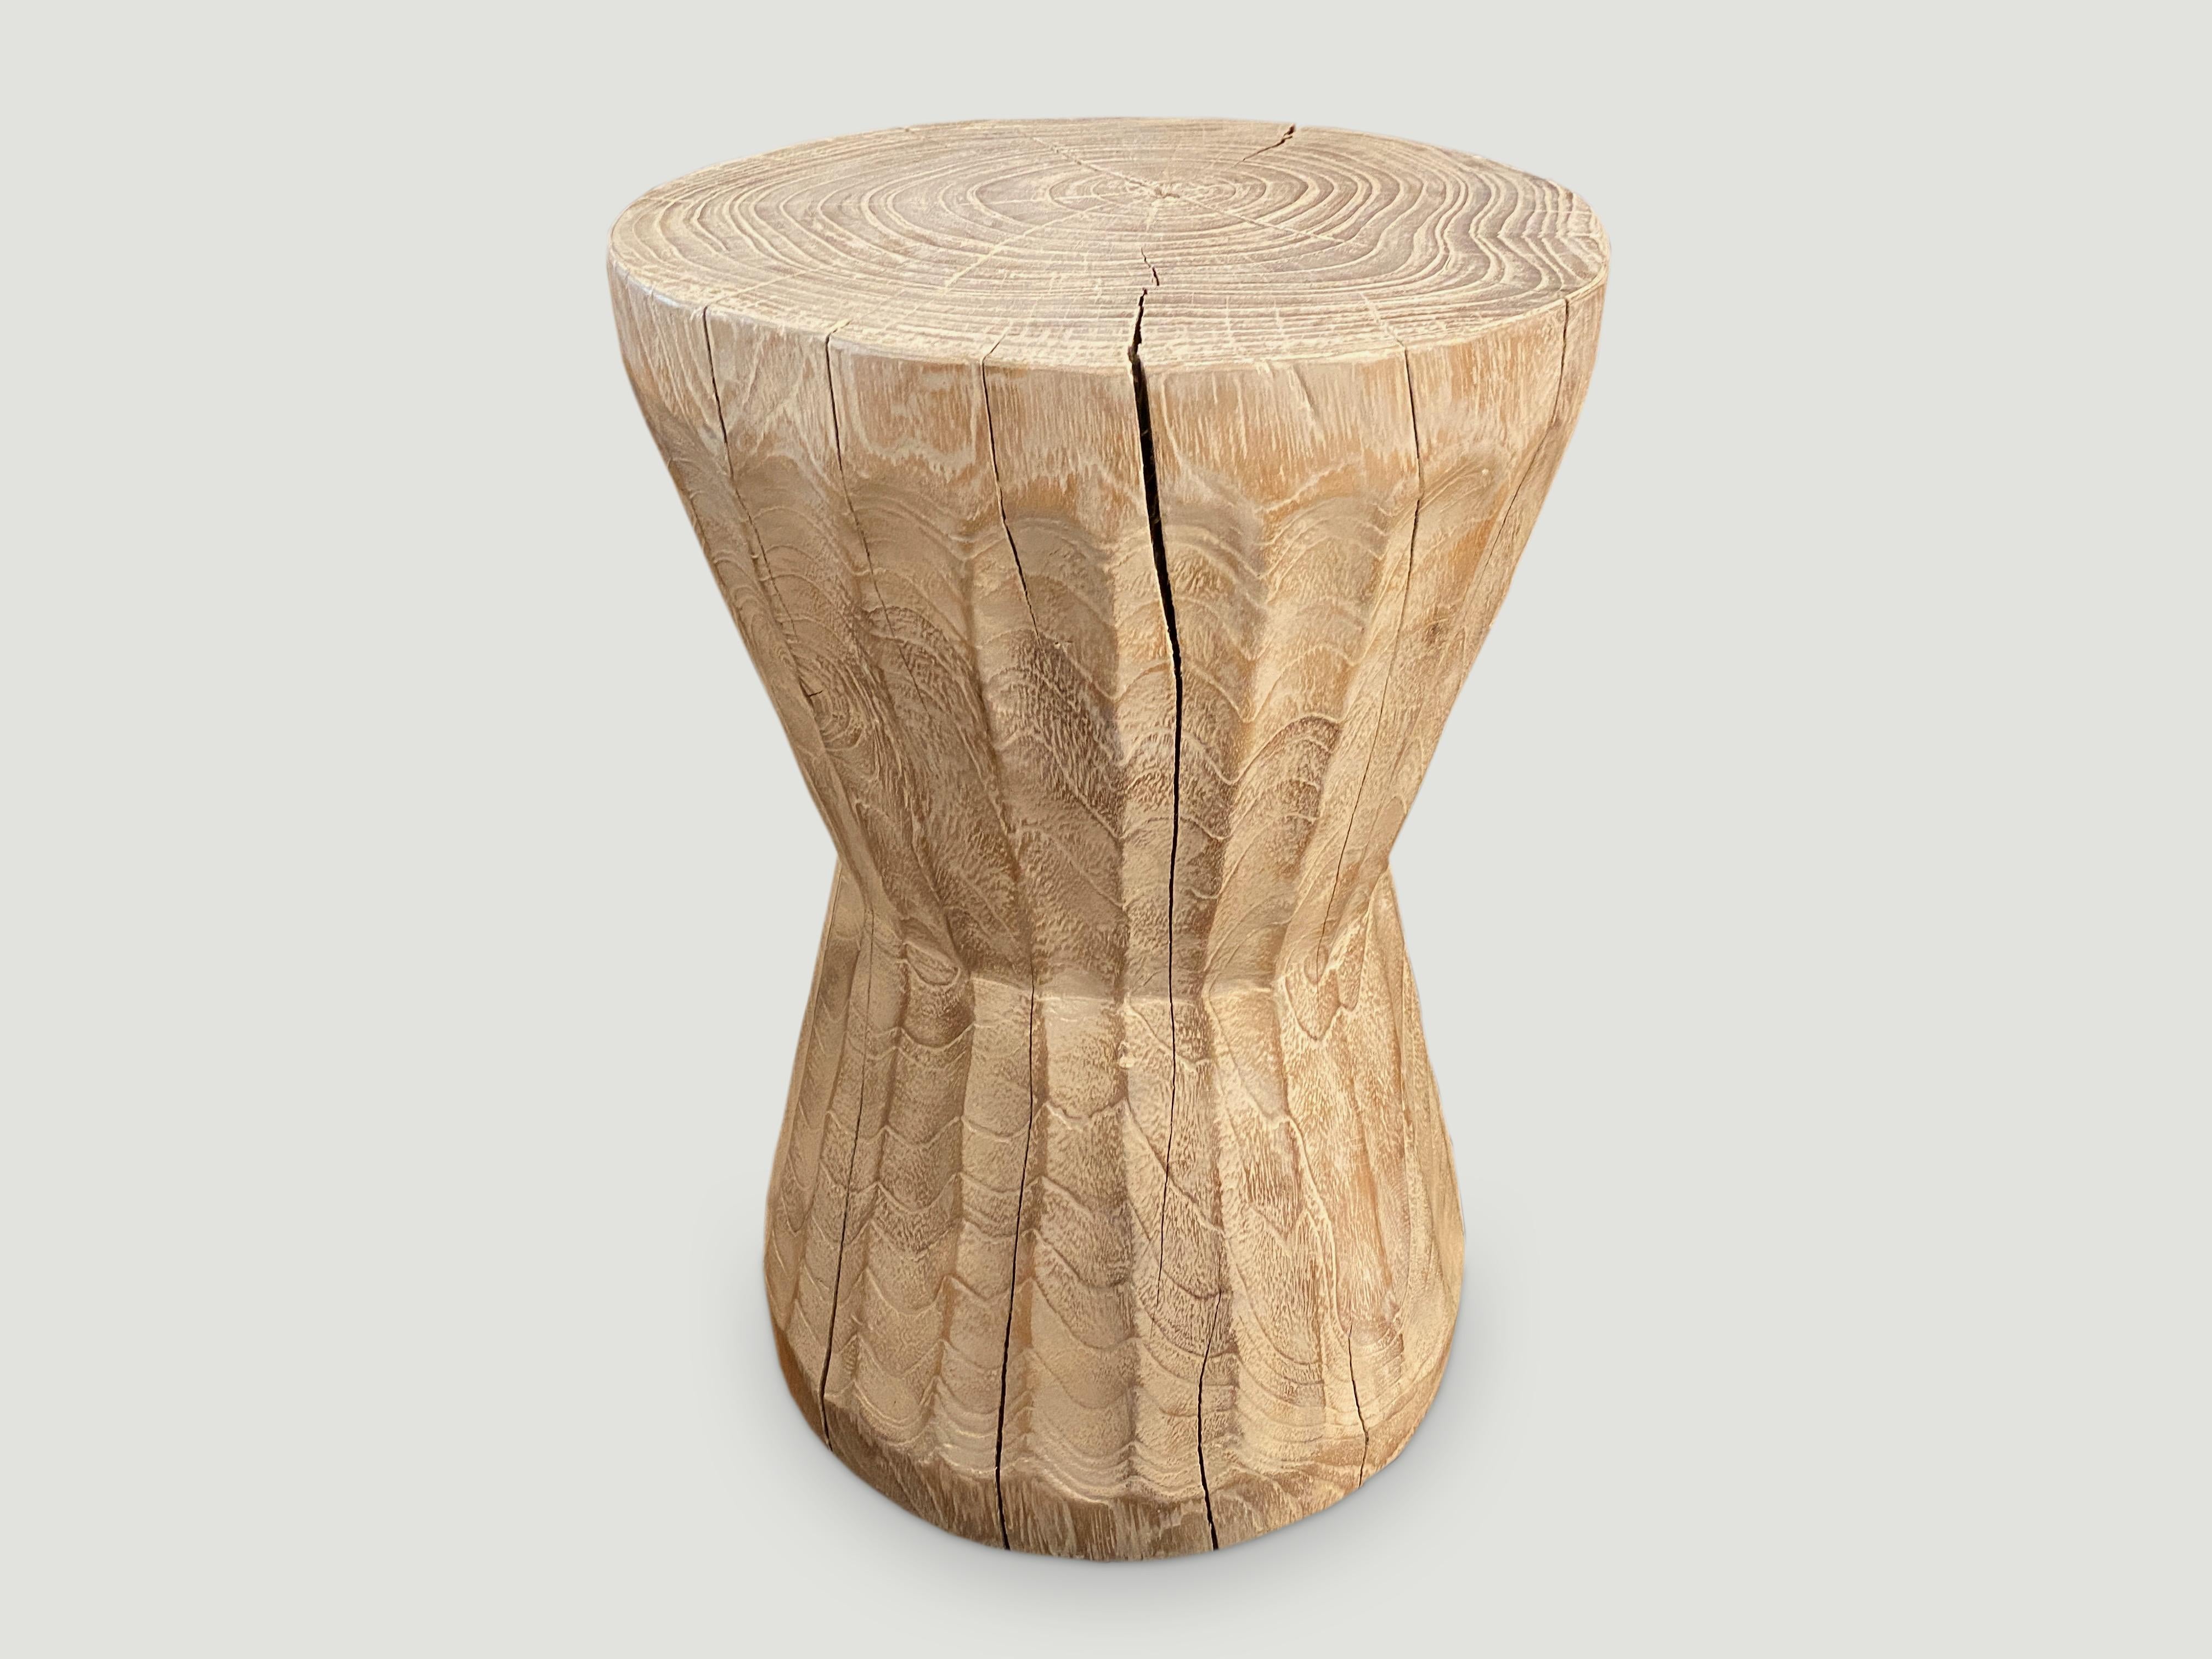 Hand carved bevelled reclaimed teak side table or stool that celebrates cracks and crevices. Please scroll down to the last image which we produced for 1Hotel Miami Beach. Perfect for inside or outside living.

Andrianna Shamaris. The Leader In